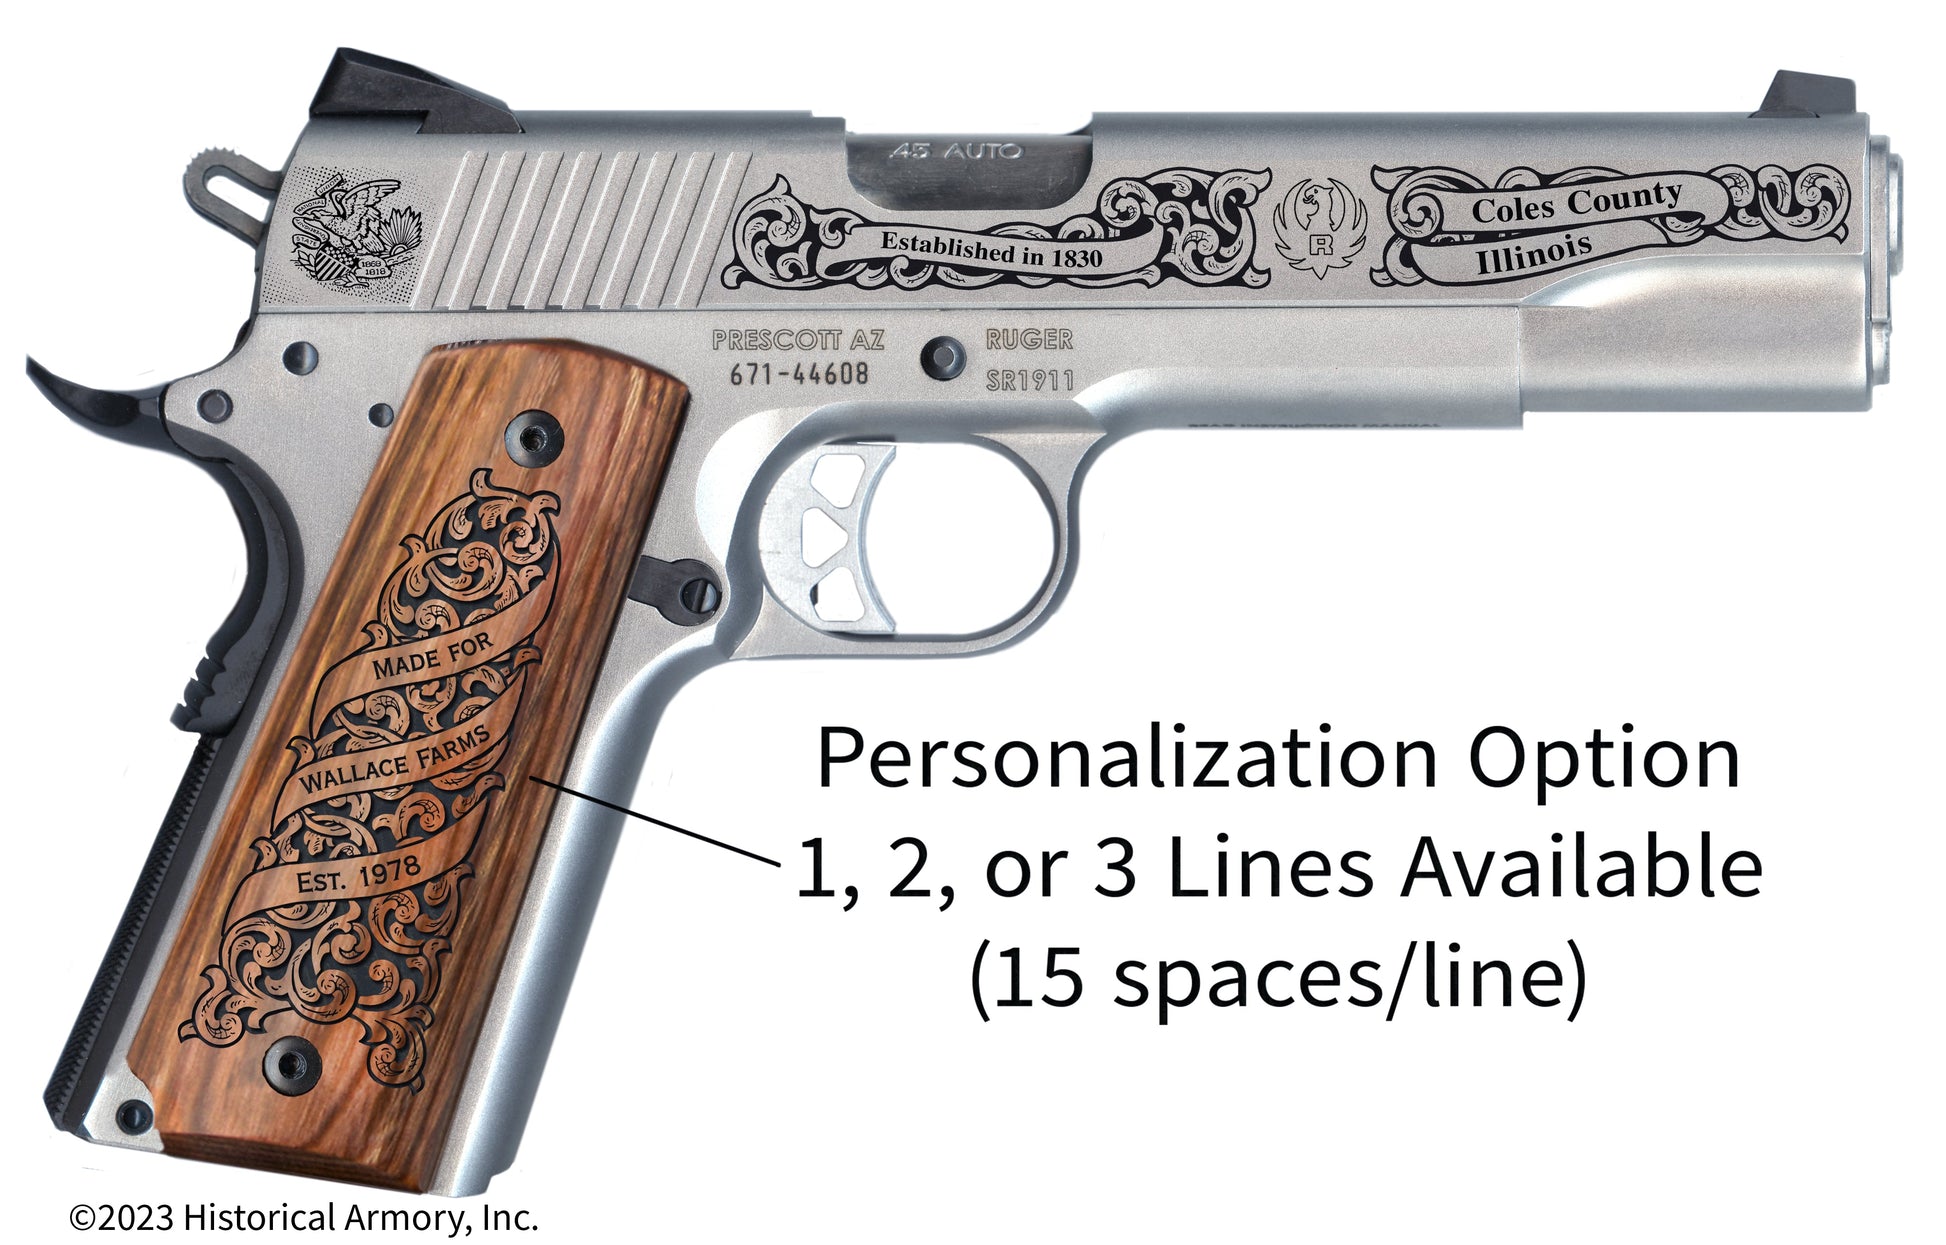 Coles County Illinois Personalized Engraved .45 Auto Ruger 1911